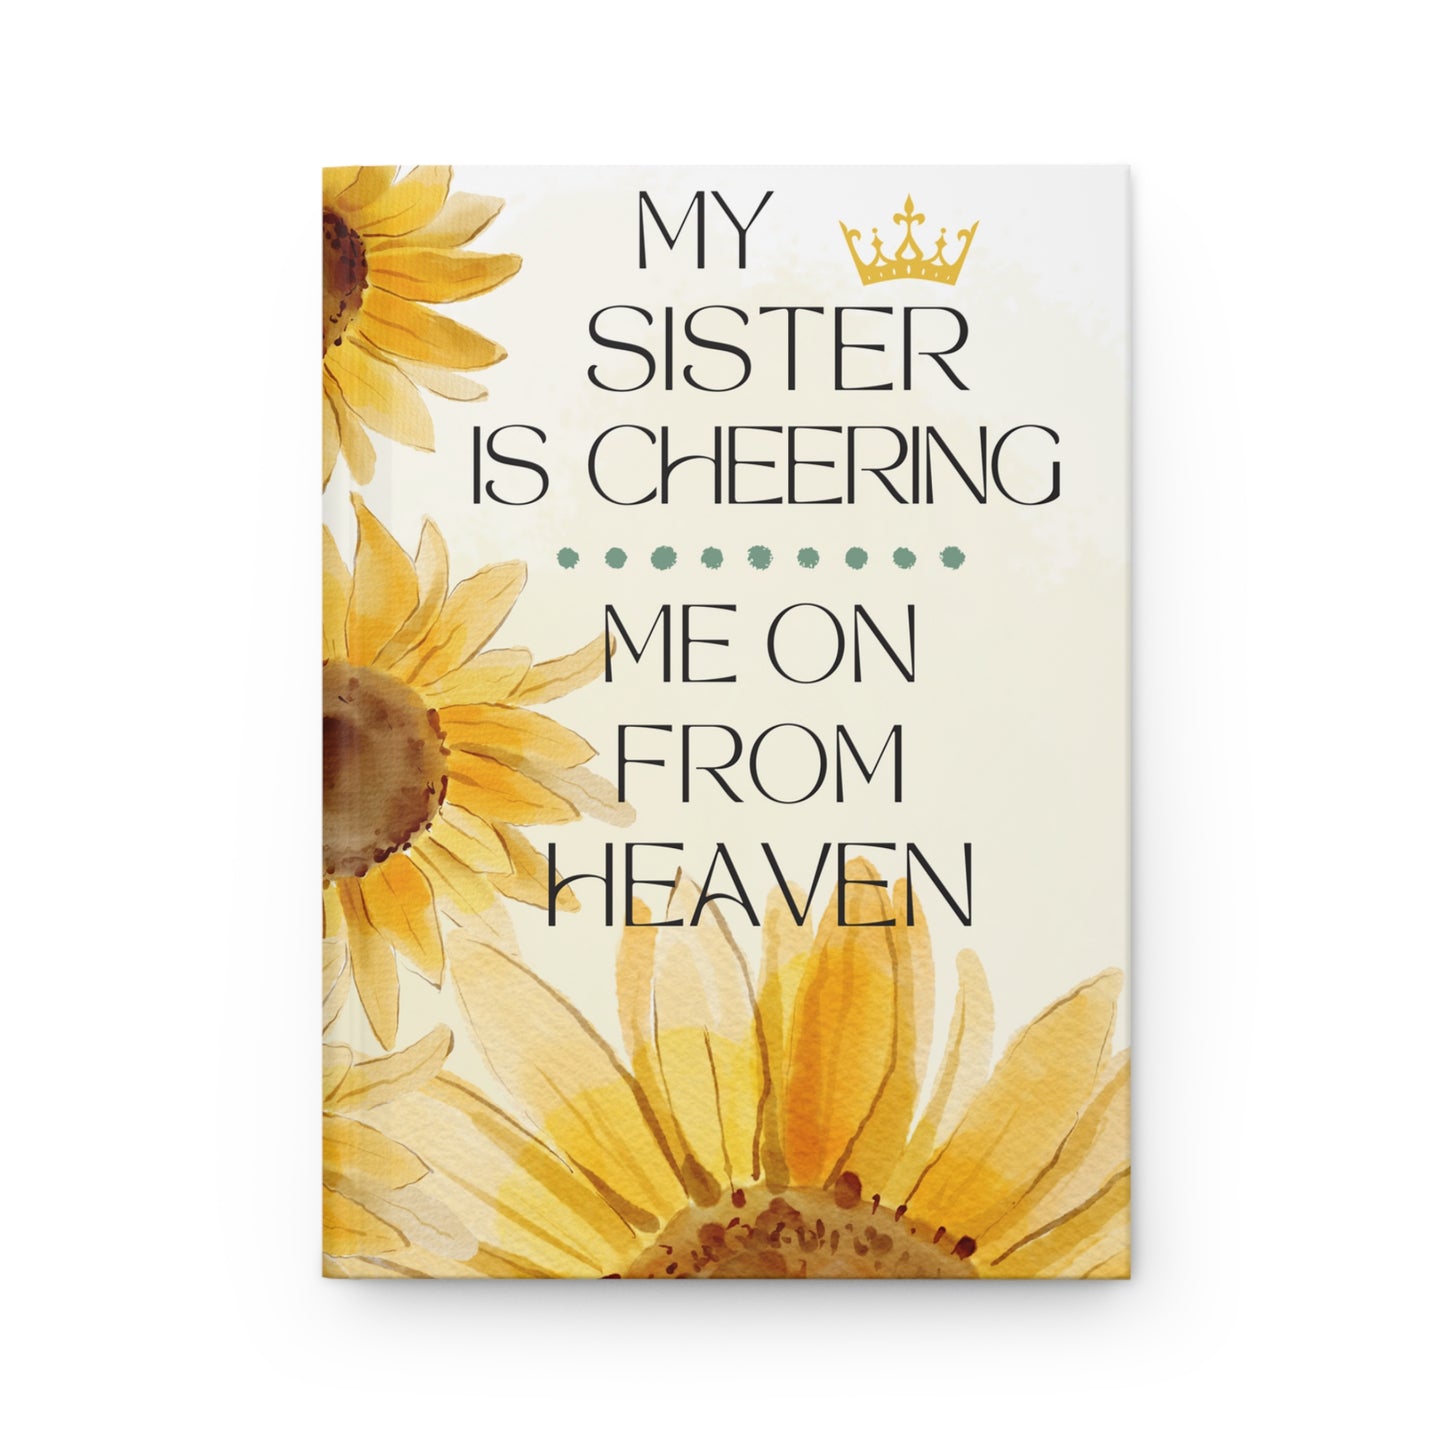 Grief Journal for Loss of Sister, Cheering Me On From Heaven